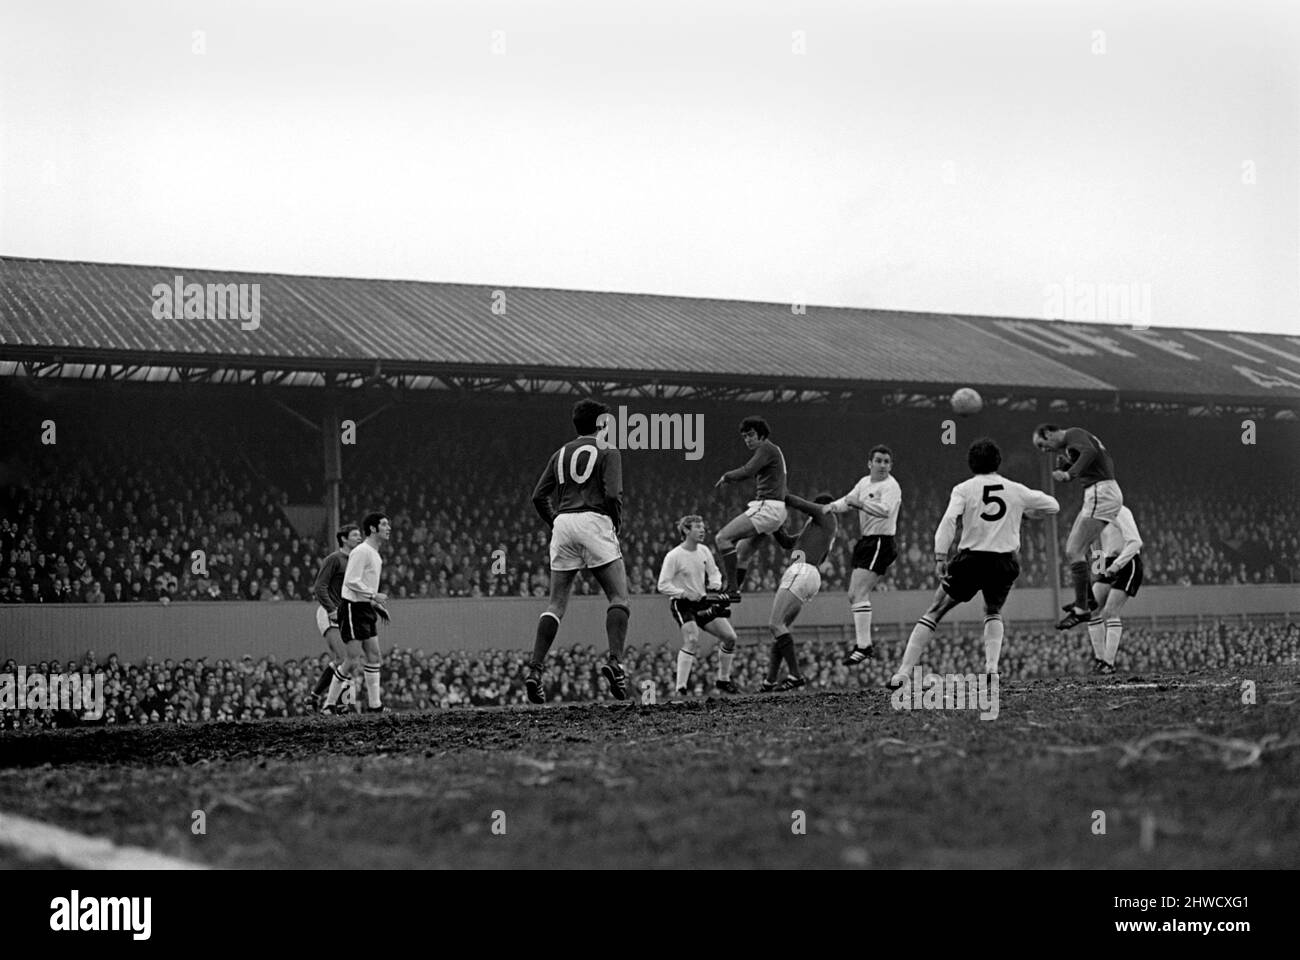 Derby v. Nottingham Forest. Action from the match. December 1969 Z11534-029 Stock Photo